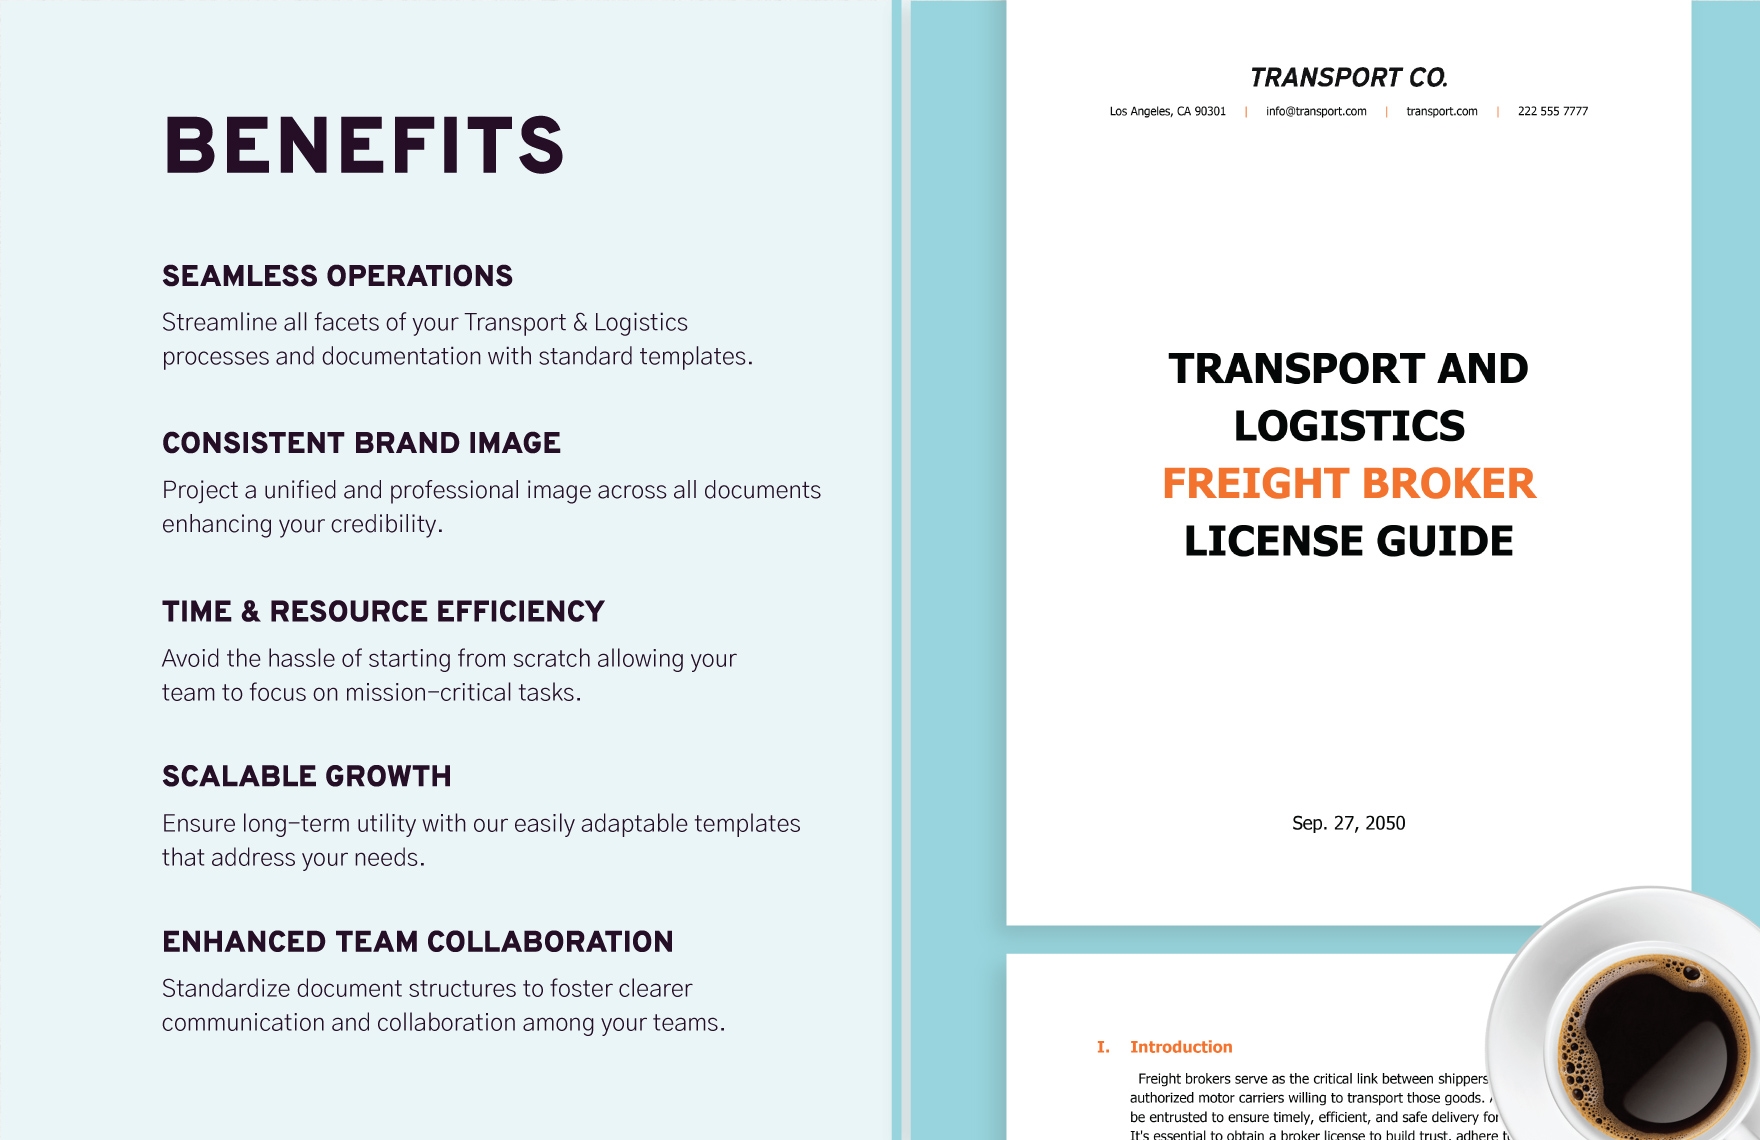 Transport and Logistics Freight Broker License Guide Template